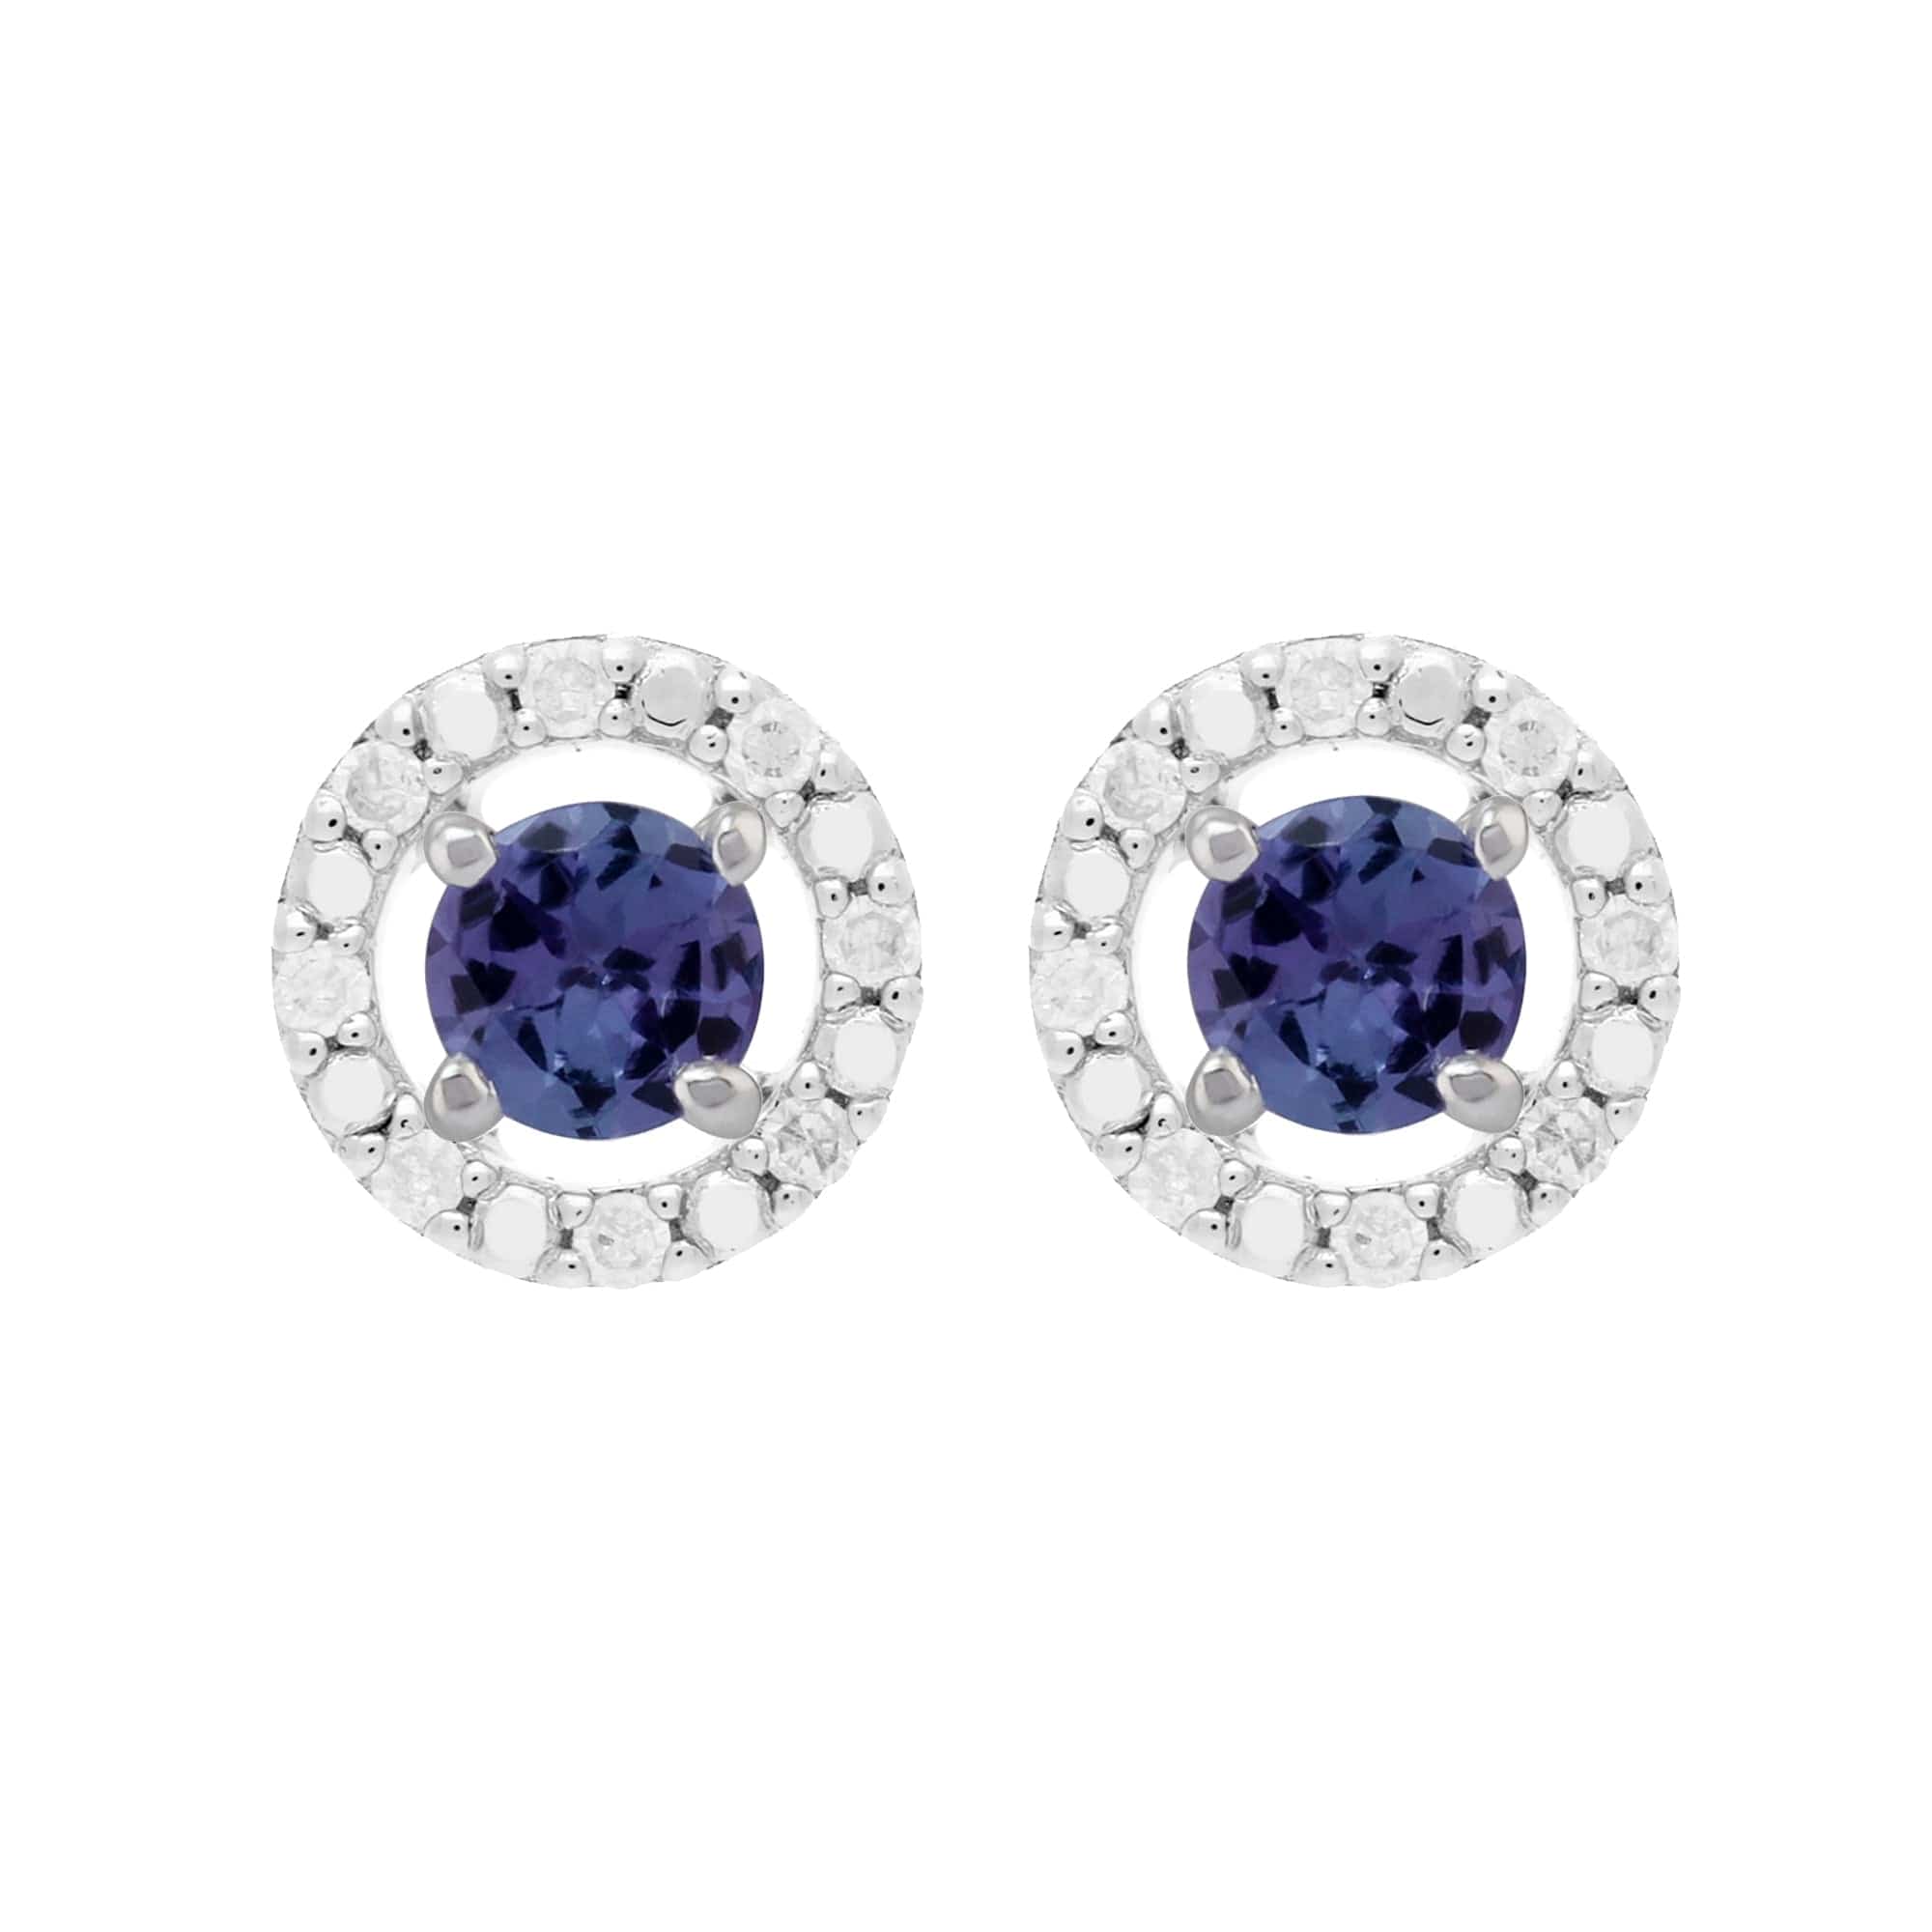 18937-162E0228019 Classic Round Tanzanite Stud Earrings with Detachable Diamond Round Ear Jacket in 9ct White Gold 1